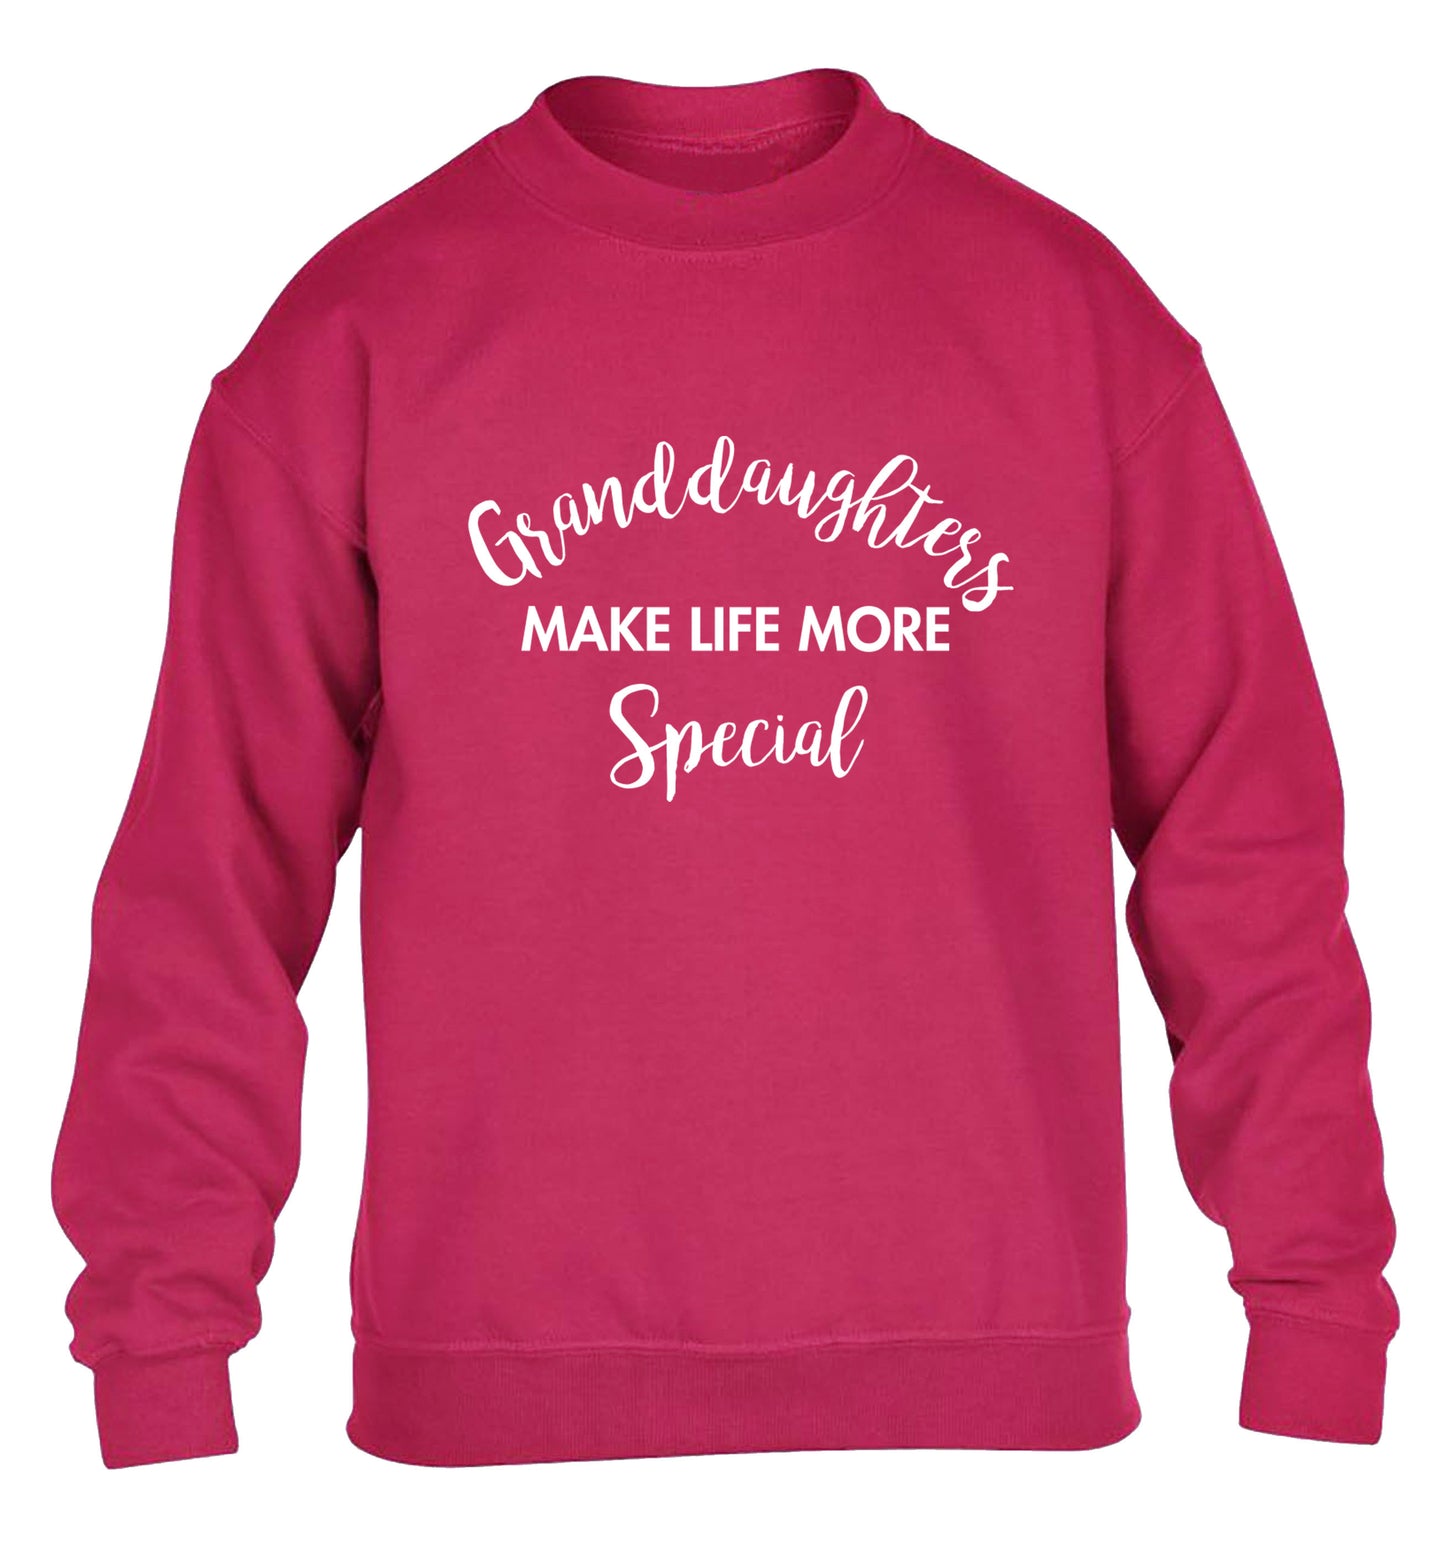 Granddaughters make life more special children's pink sweater 12-14 Years